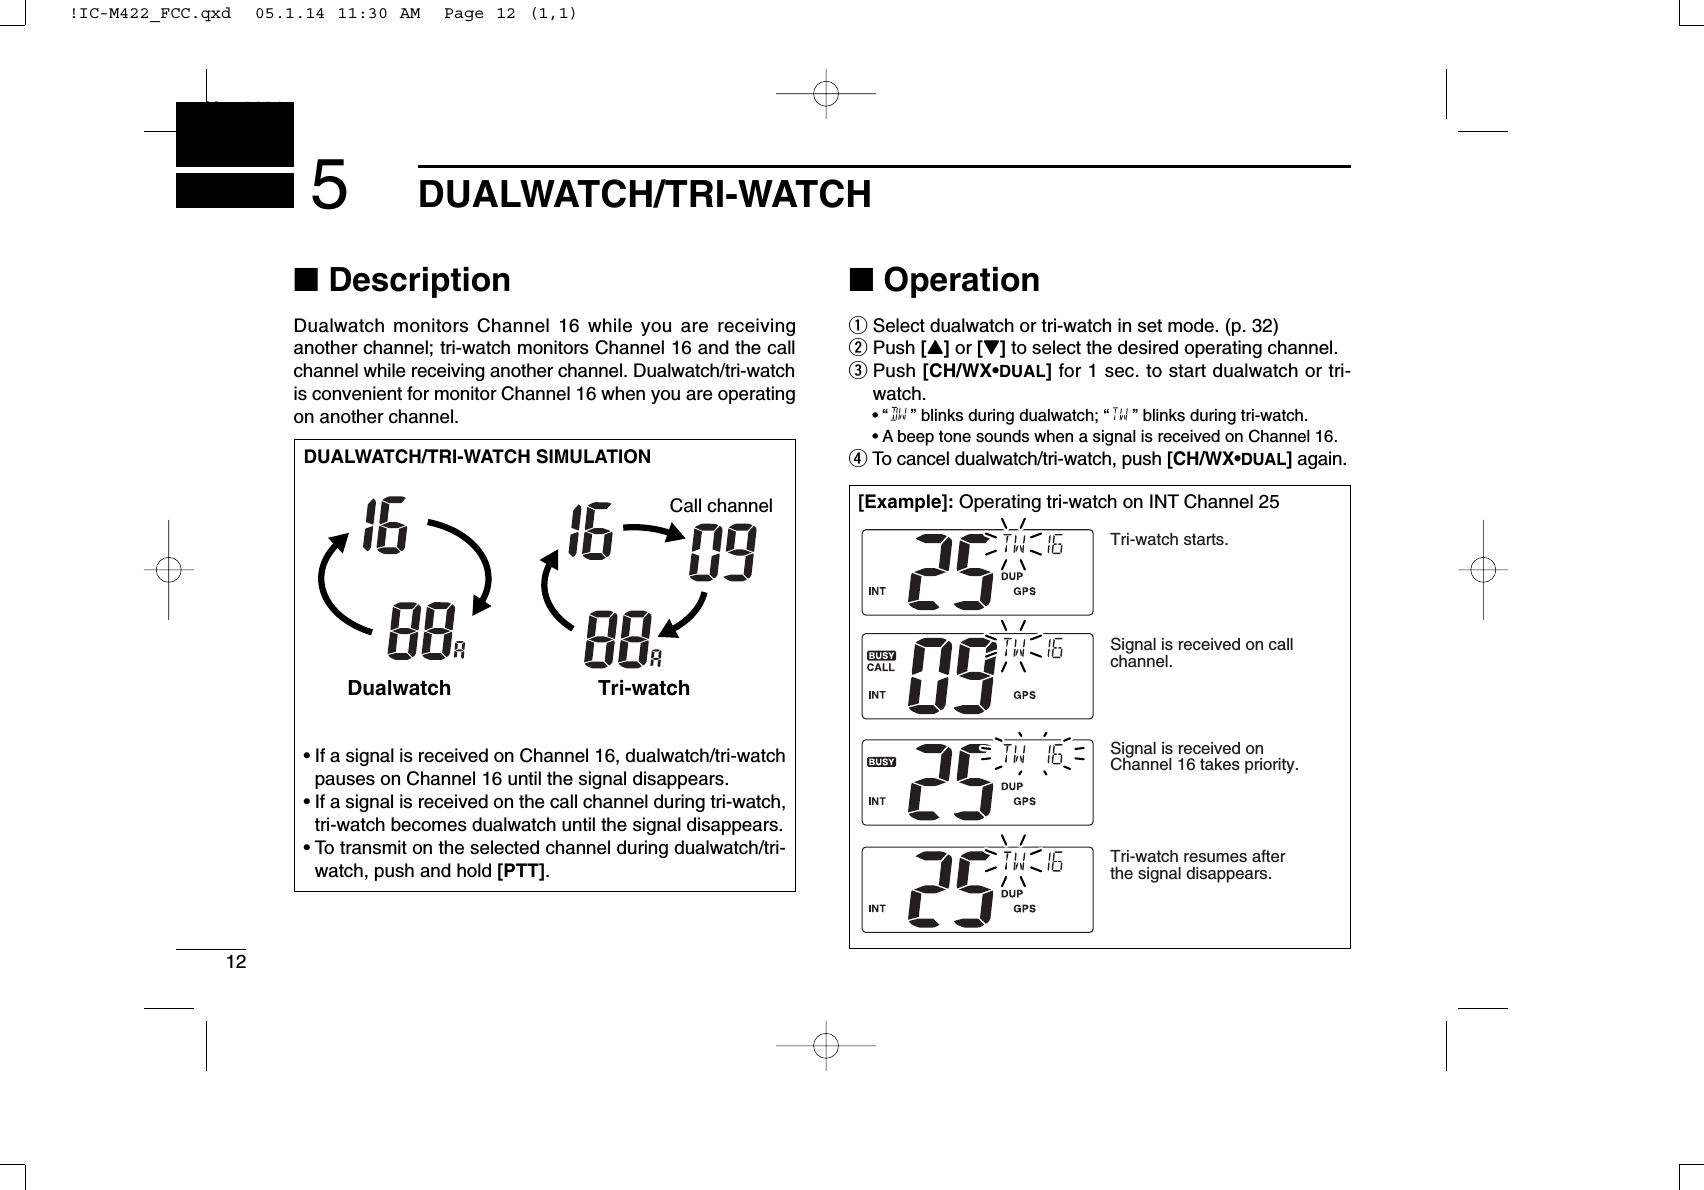 12DUALWATCH/TRI-WATCHNew20015■DescriptionDualwatch monitors Channel 16 while you are receiving another channel; tri-watch monitors Channel 16 and the callchannel while receiving another channel. Dualwatch/tri-watchis convenient for monitor Channel 16 when you are operatingon another channel.■OperationqSelect dualwatch or tri-watch in set mode. (p. 32)wPush [Y]or [Z]to select the desired operating channel.ePush [CH/WX•DUAL]for 1 sec. to start dualwatch or tri-watch.•“ ” blinks during dualwatch; “” blinks during tri-watch.•A beep tone sounds when a signal is received on Channel 16.rTo cancel dualwatch/tri-watch, push [CH/WX•DUAL]again.DUALWATCH/TRI-WATCH SIMULATION•If a signal is received on Channel 16, dualwatch/tri-watchpauses on Channel 16 until the signal disappears.•If a signal is received on the call channel during tri-watch,tri-watch becomes dualwatch until the signal disappears.•To transmit on the selected channel during dualwatch/tri-watch, push and hold [PTT].Dualwatch Tri-watchCall channel[Example]: Operating tri-watch on INT Channel 25Tri-watch starts.Signal is received on call channel.Signal is received on Channel 16 takes priority.Tri-watch resumes after the signal disappears.!IC-M422_FCC.qxd  05.1.14 11:30 AM  Page 12 (1,1)